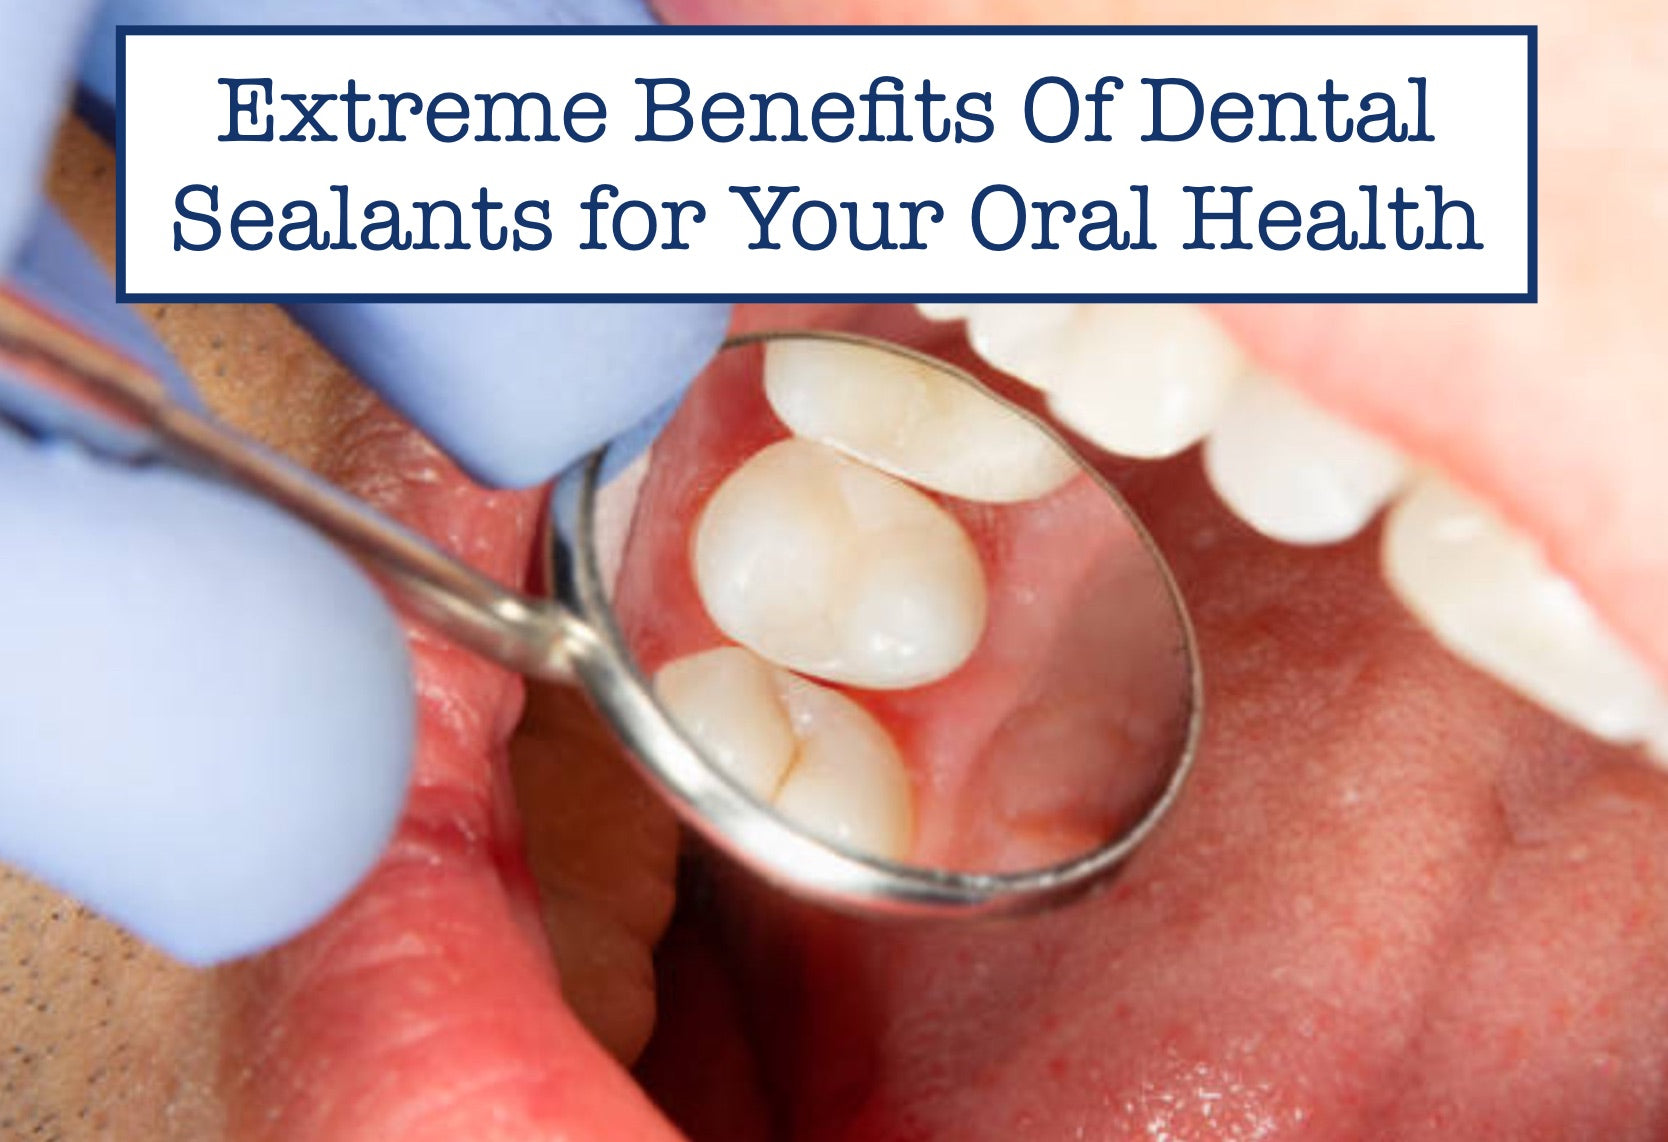 Extreme Benefits Of Dental Sealants for Your Oral Health